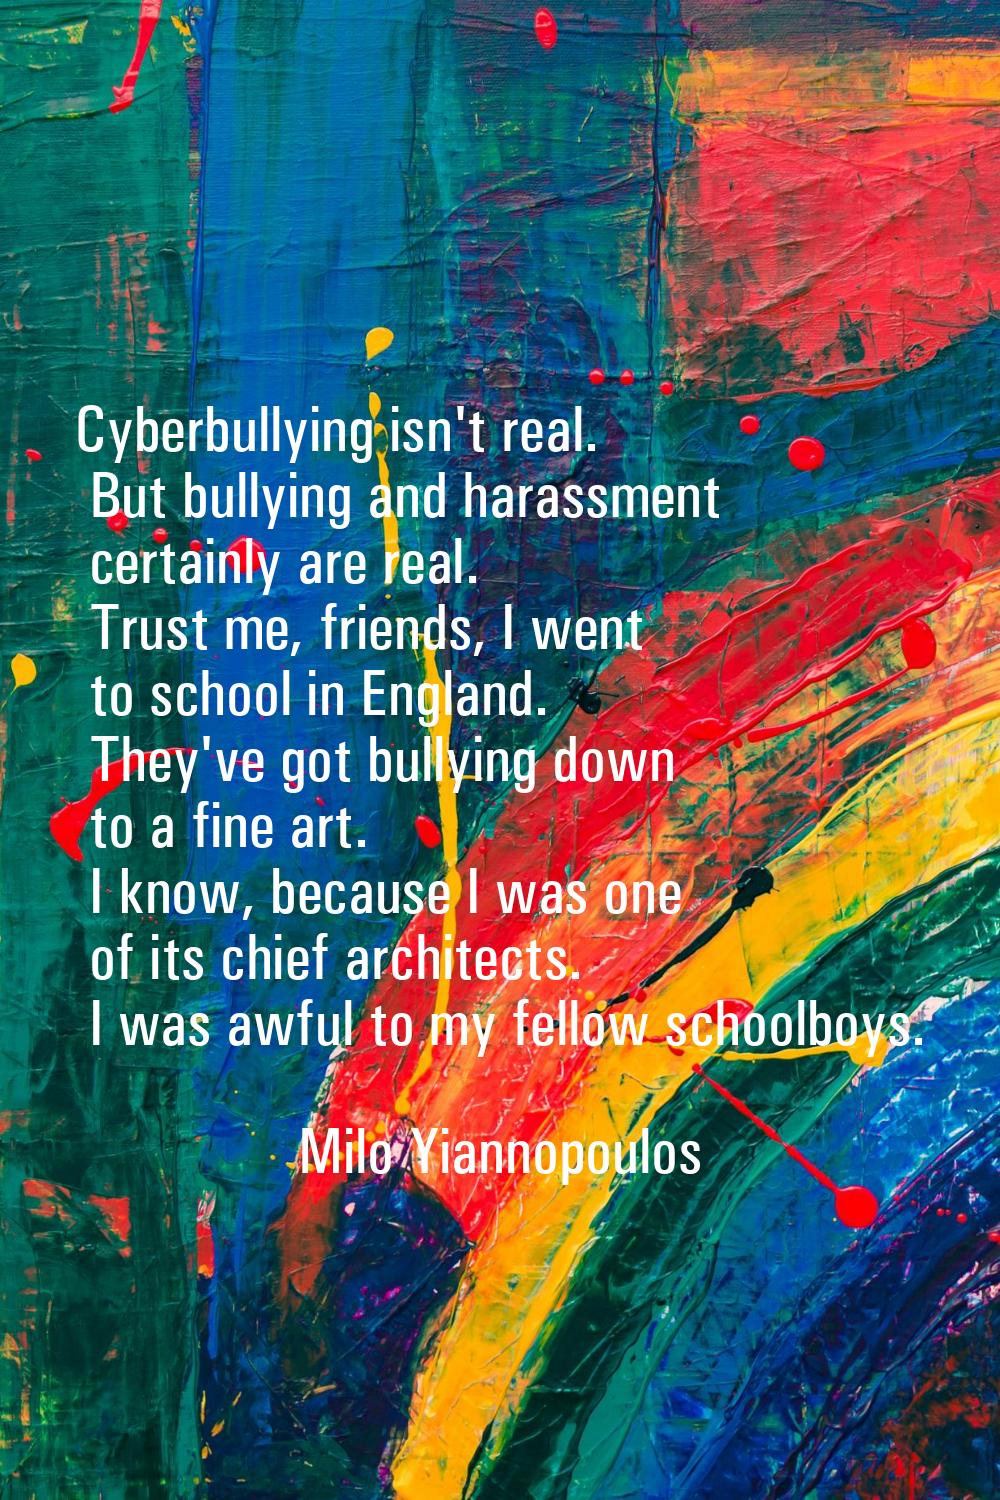 Cyberbullying isn't real. But bullying and harassment certainly are real. Trust me, friends, I went